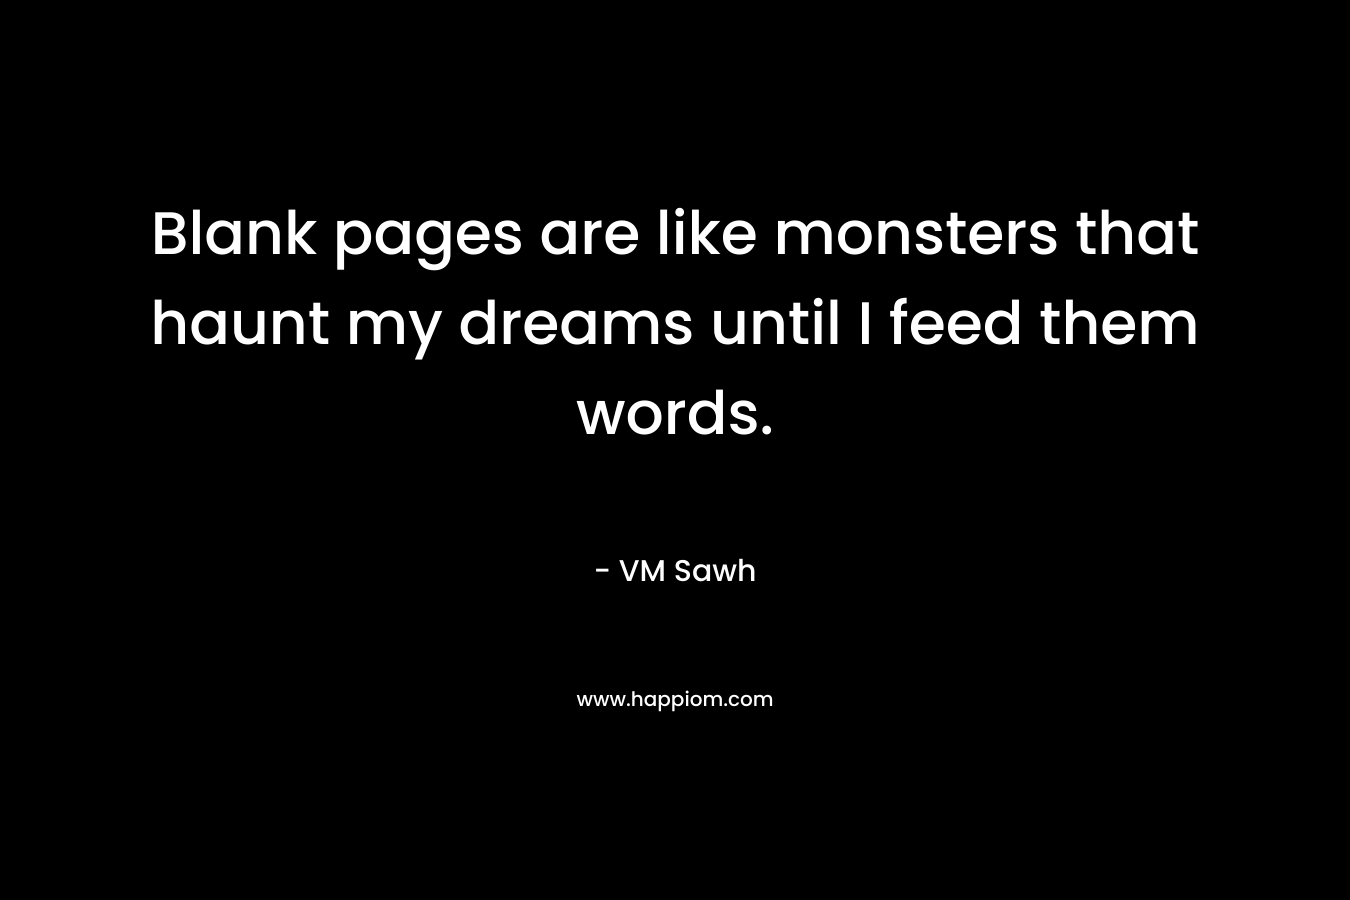 Blank pages are like monsters that haunt my dreams until I feed them words. – VM Sawh